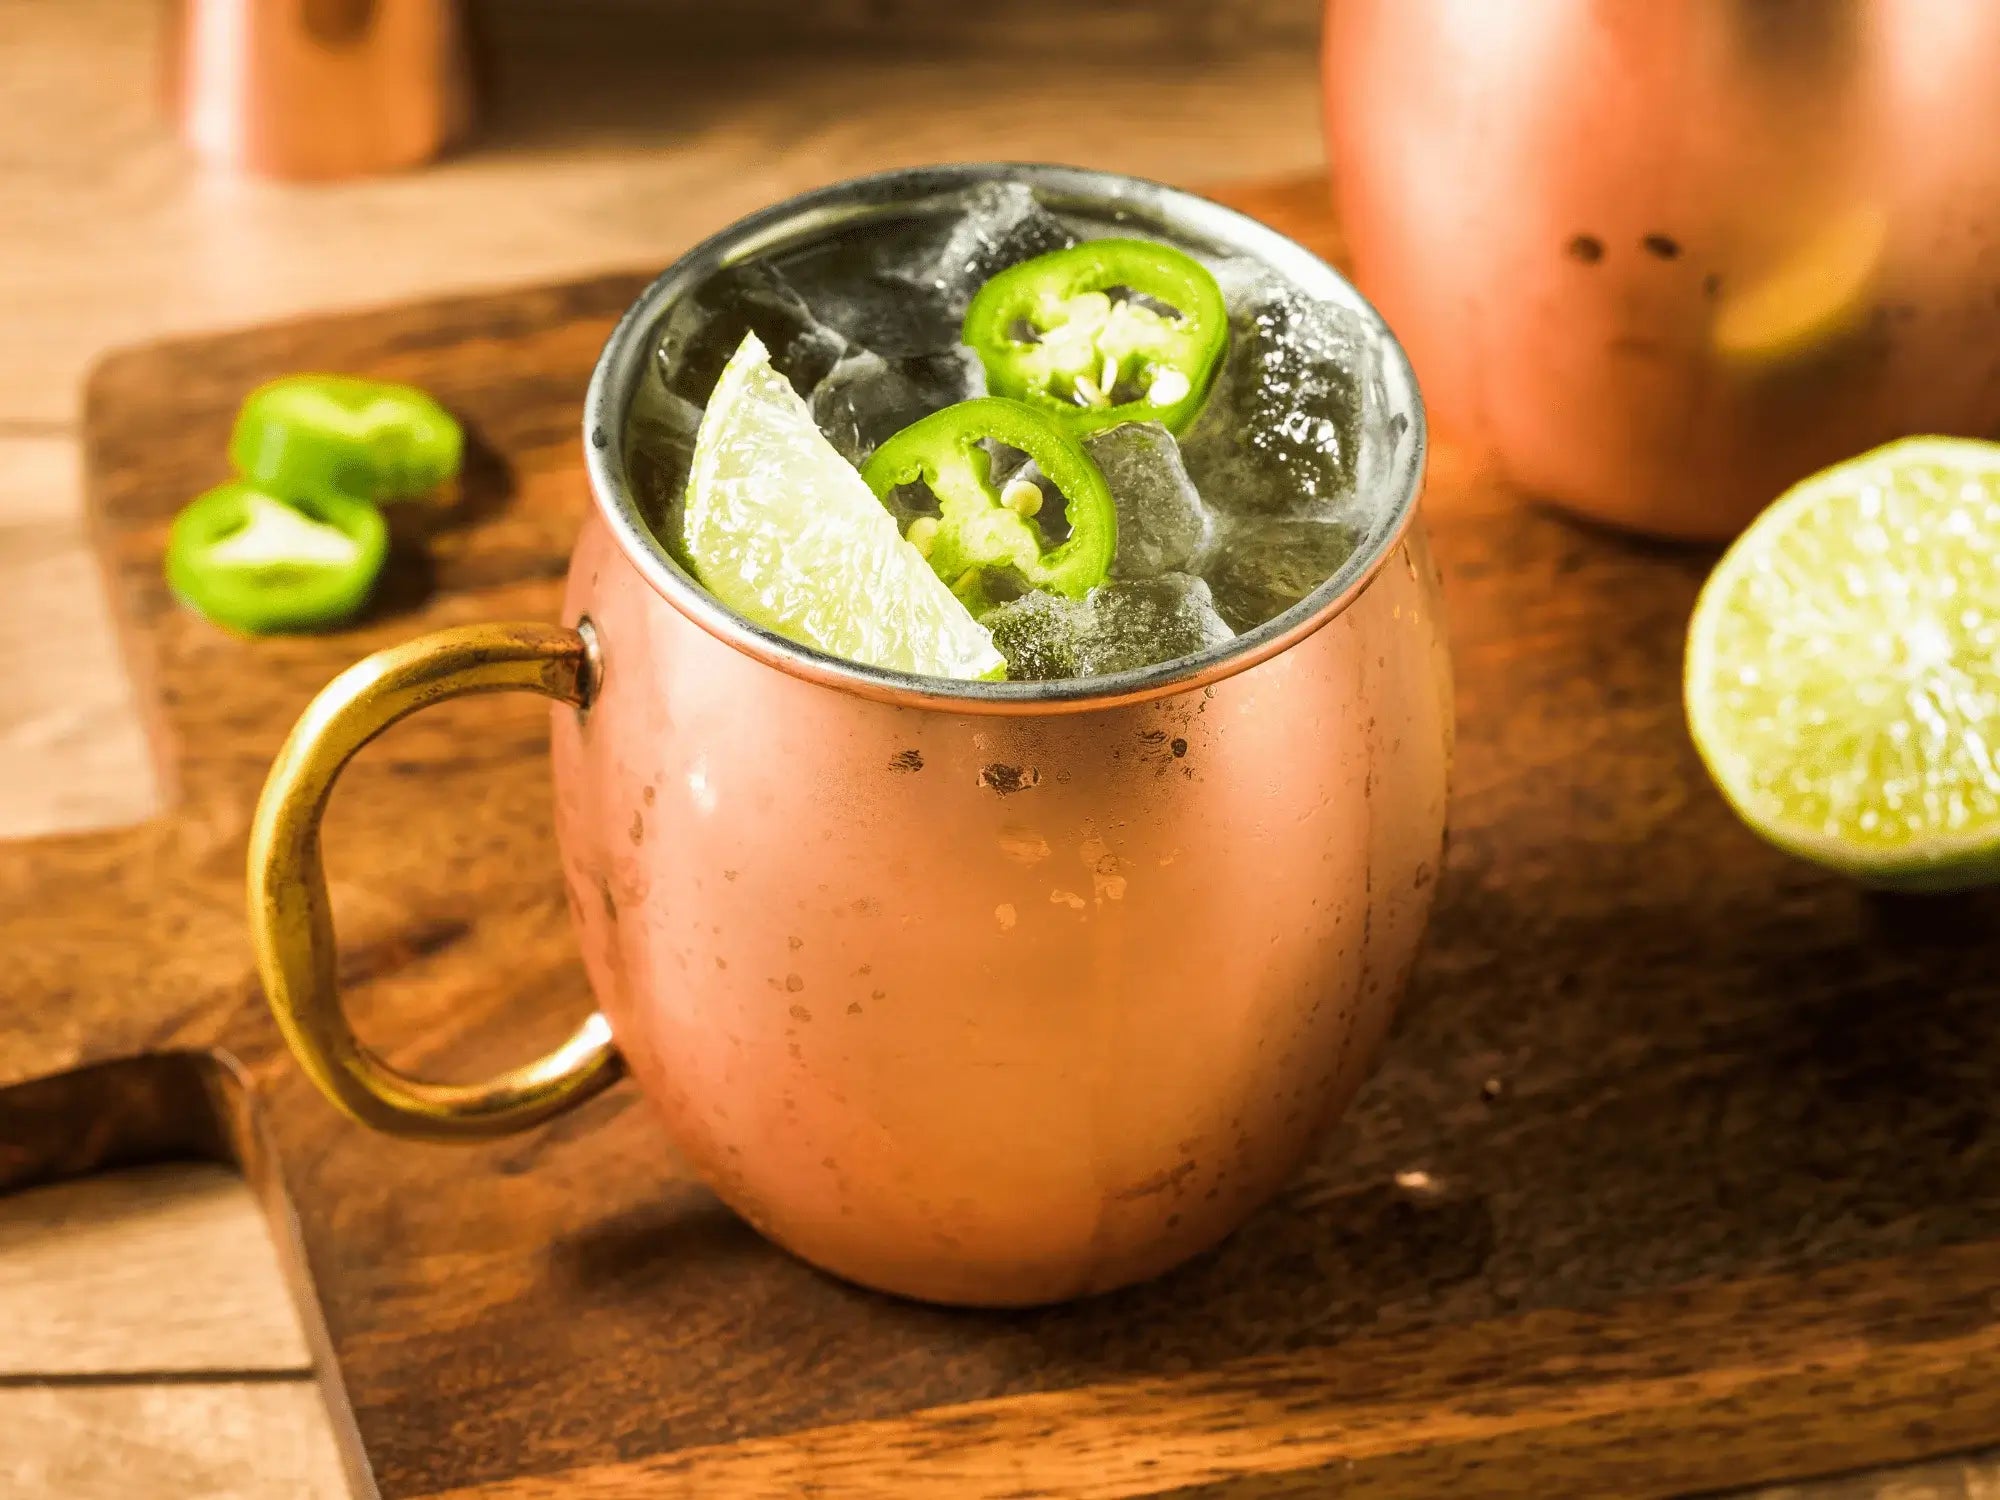 Non-alcoholic spiced mule made with seedlip spice 94 